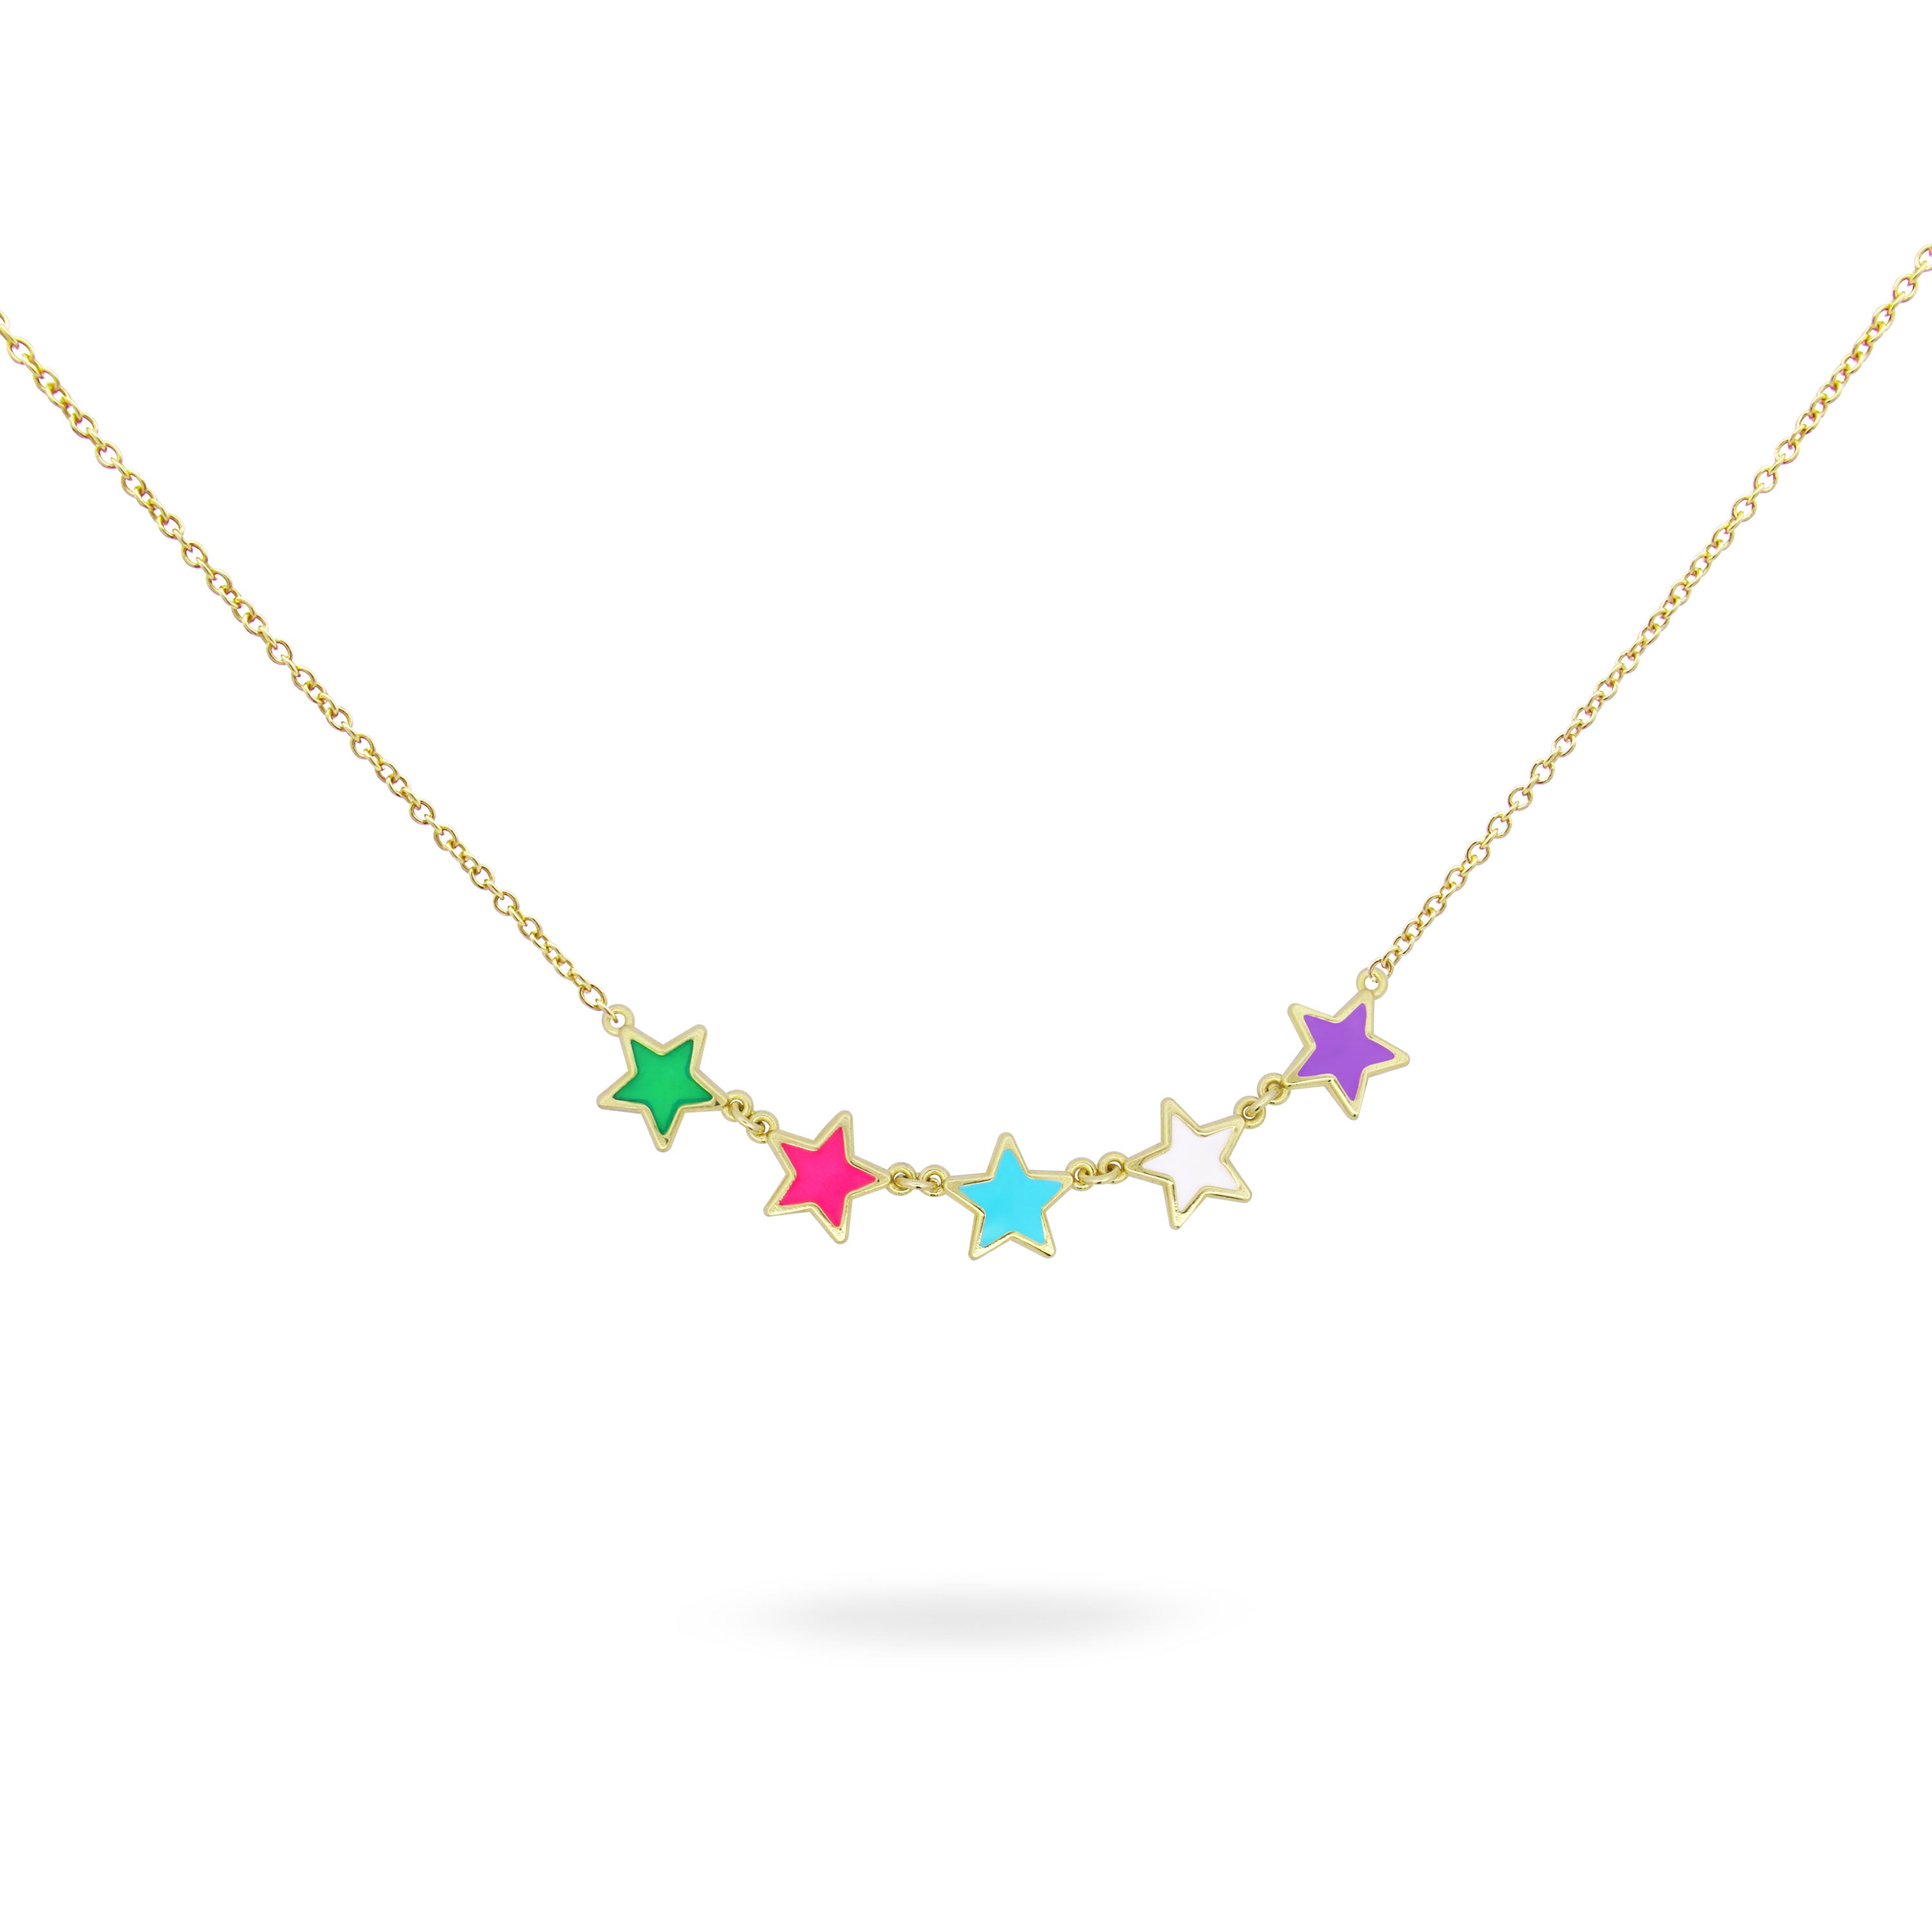 Chokers - Necklace with five enameled stars - ColorFUN - 1 | Rue des Mille